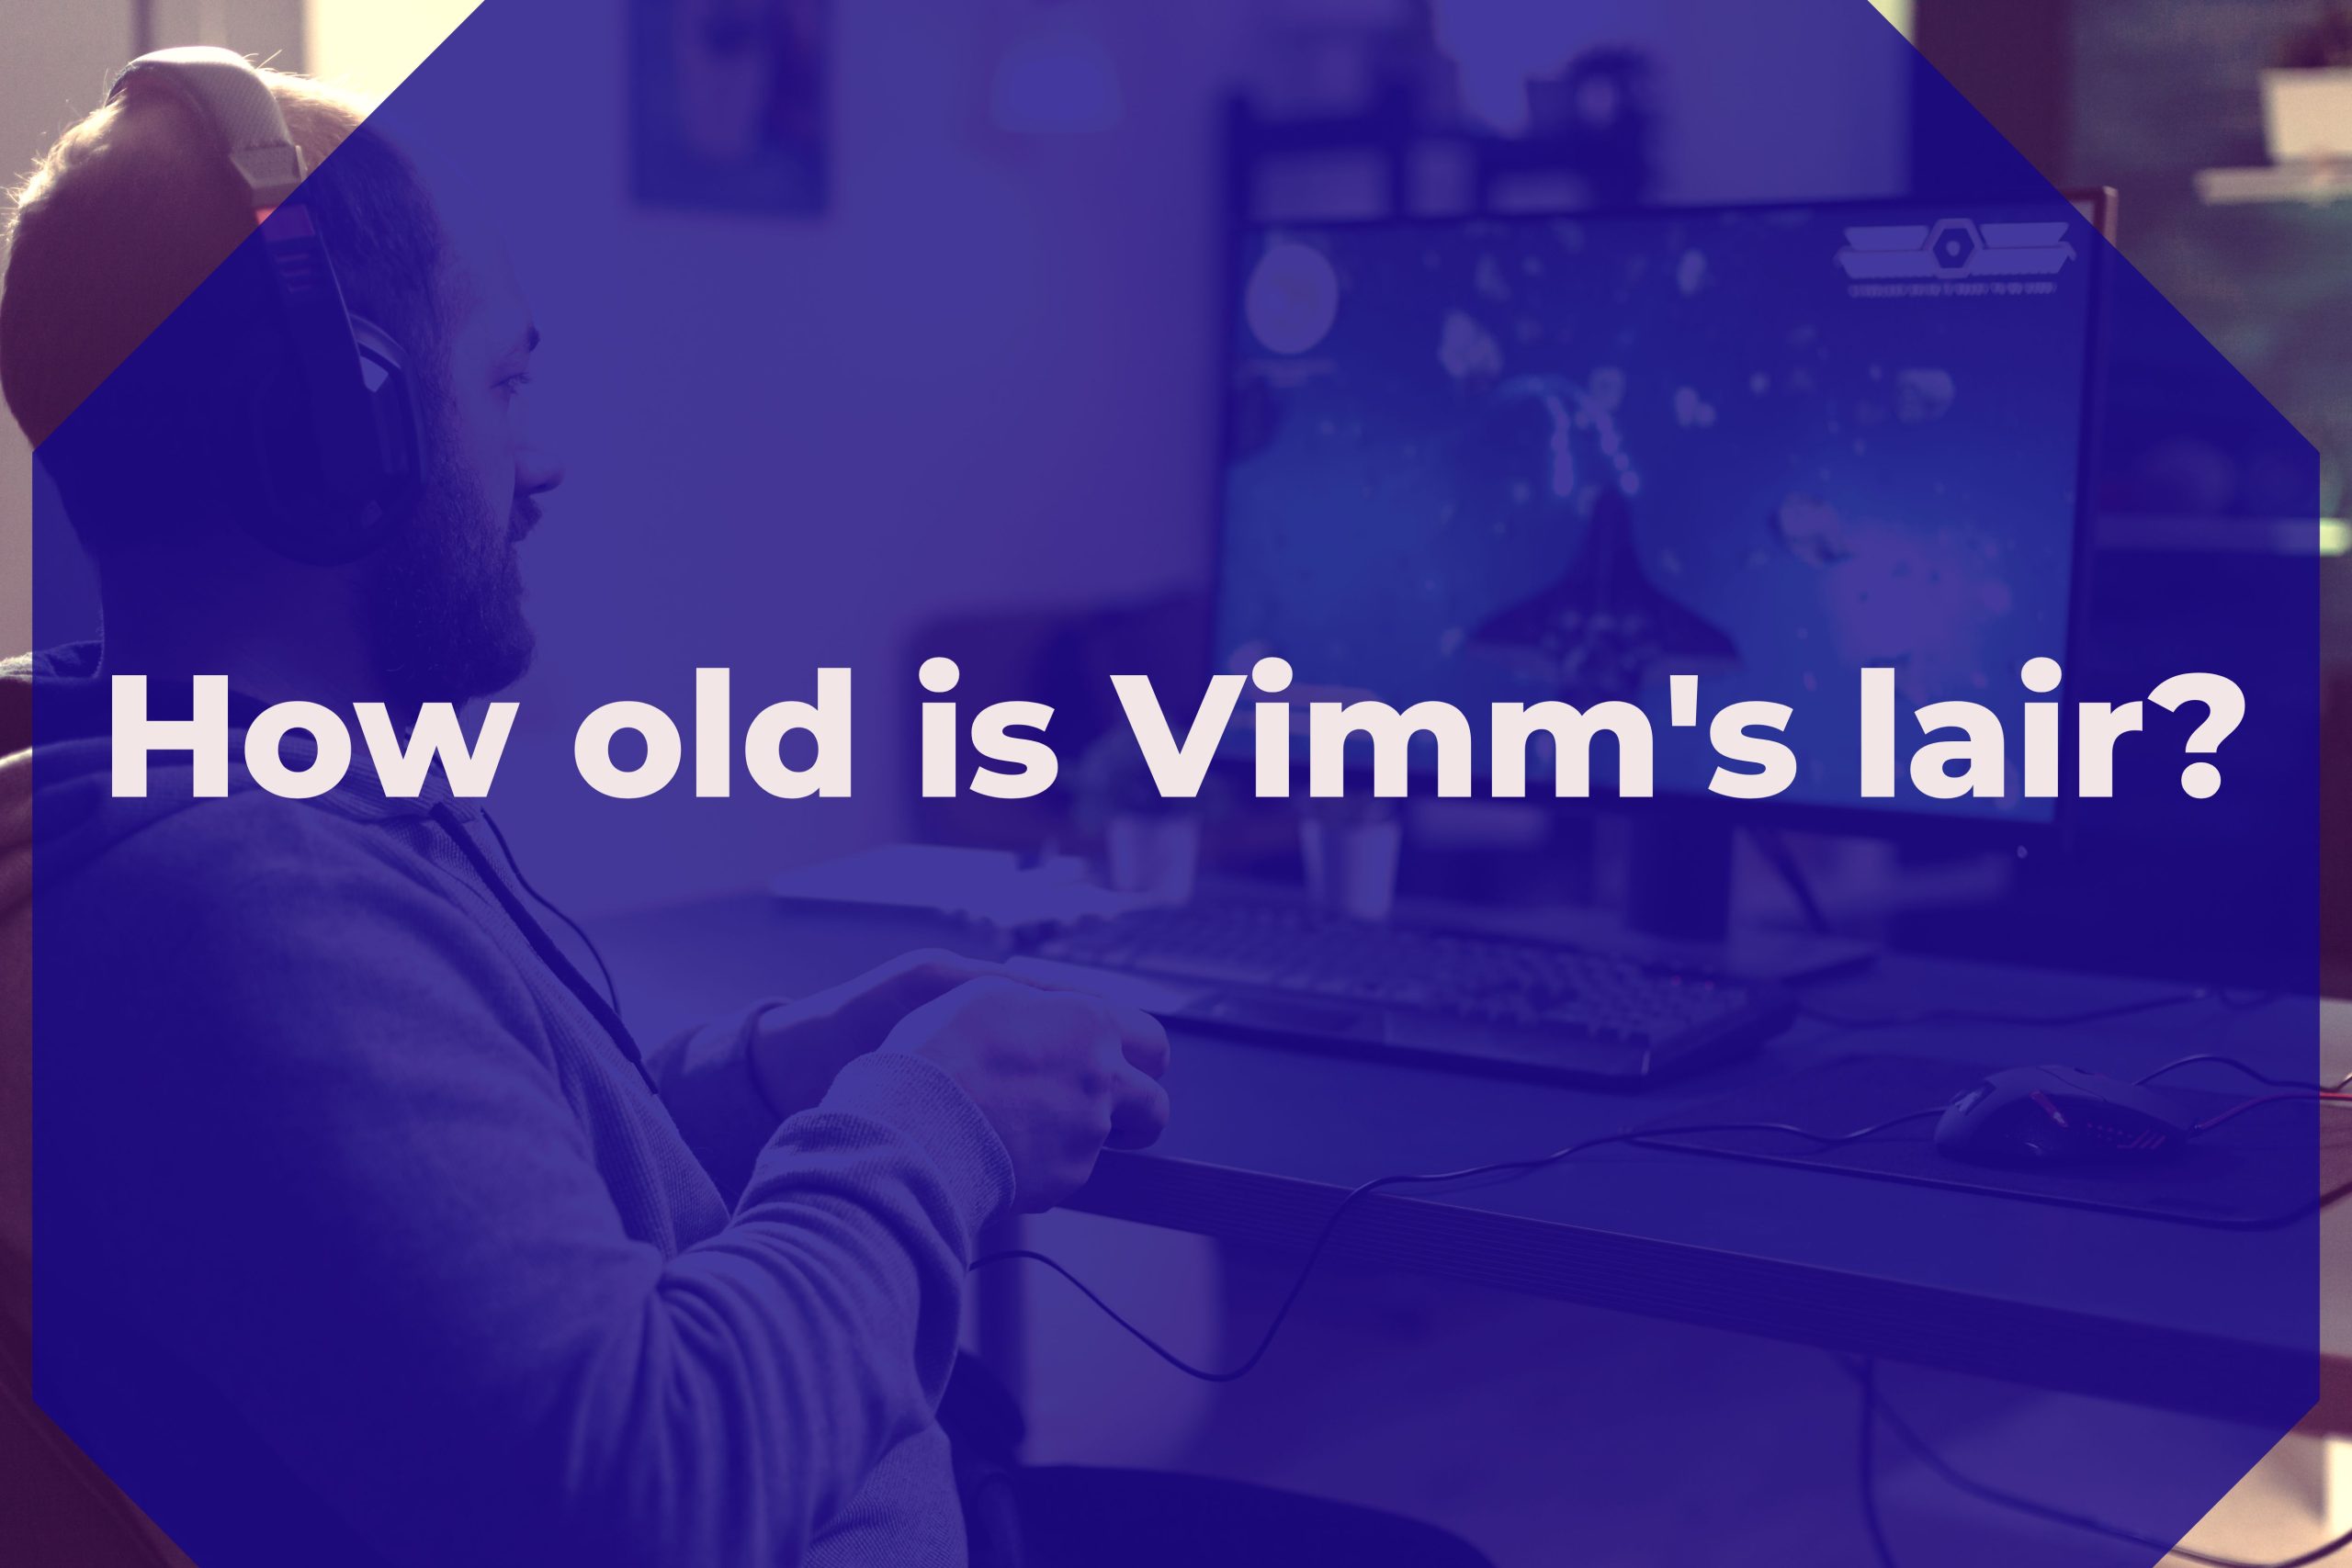 How old is Vimm's lair?